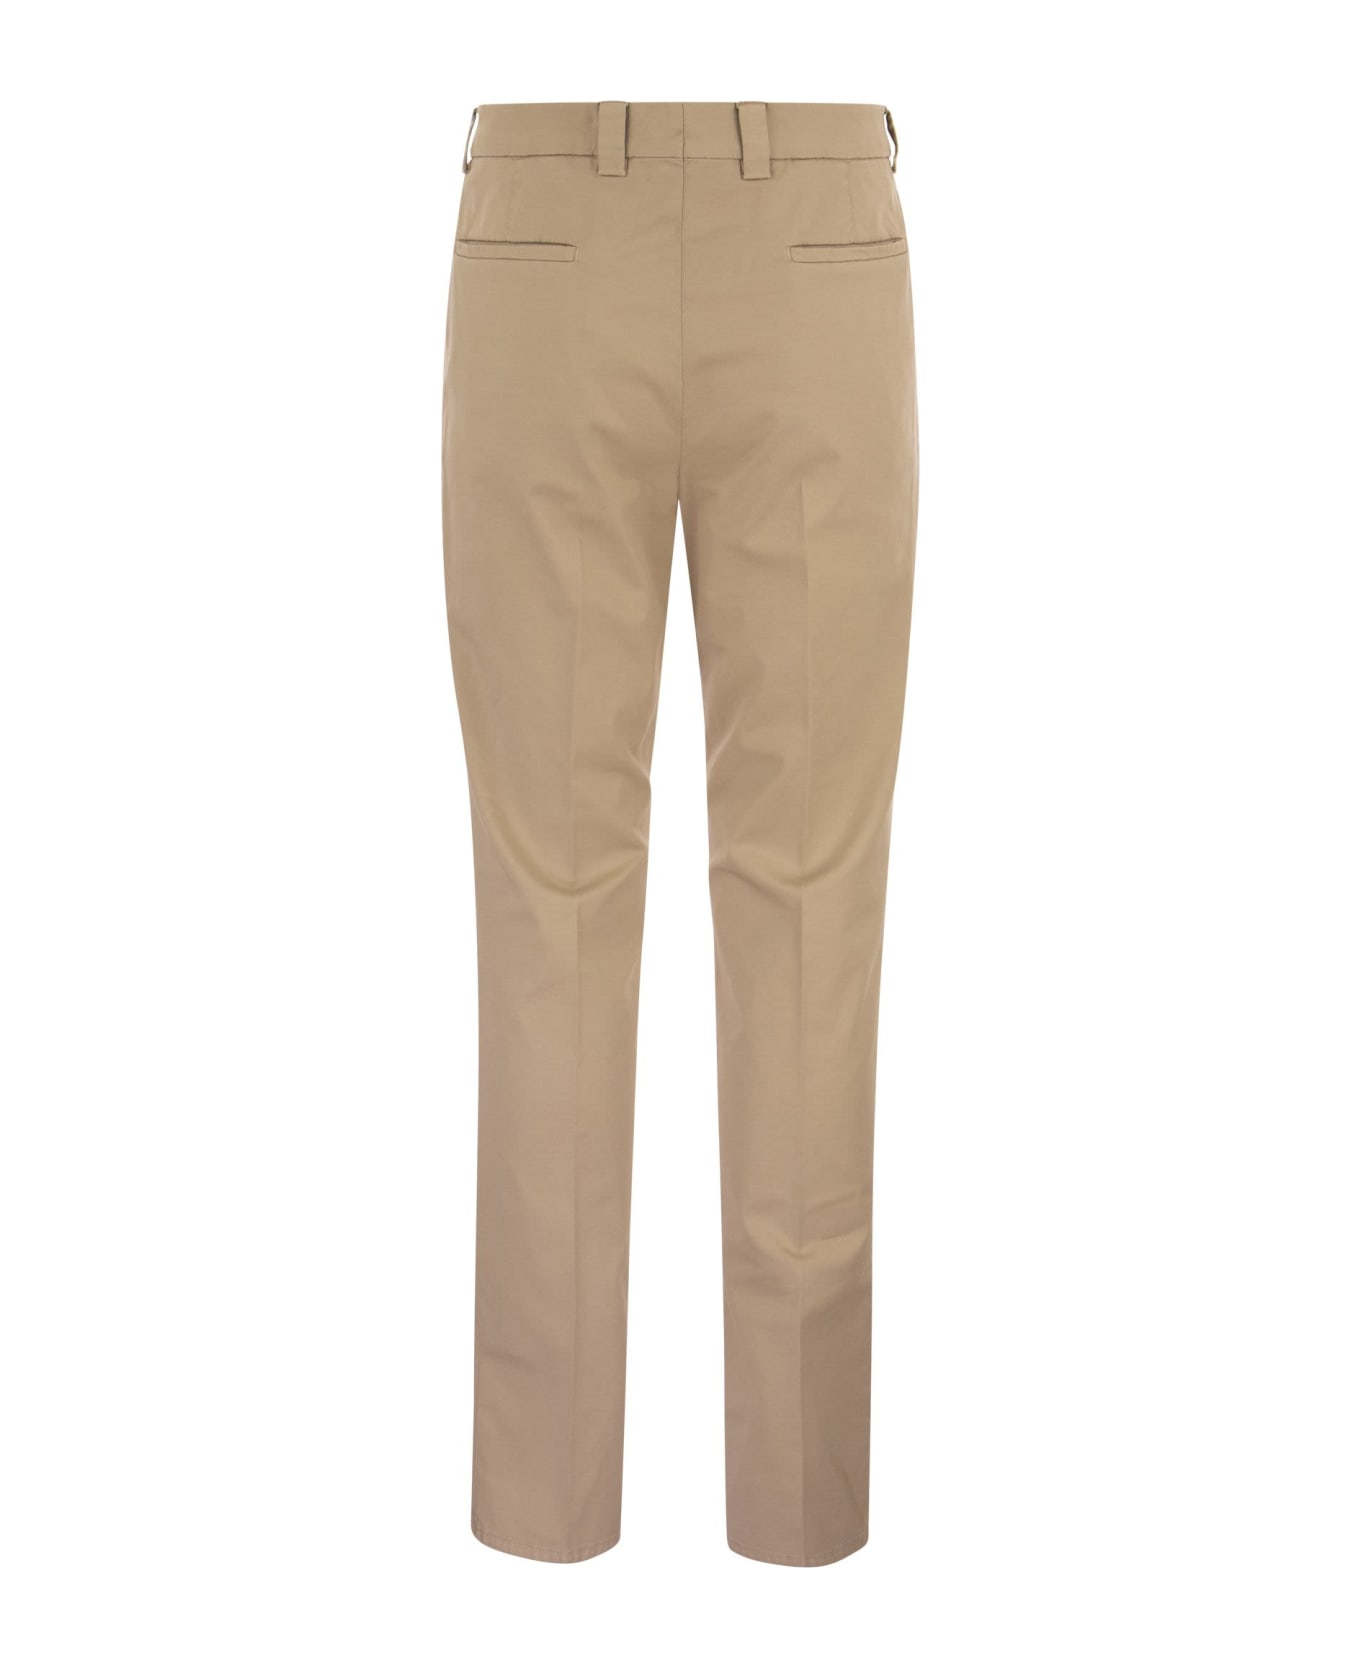 Brunello Cucinelli Garment-dyed Leisure Fit Trousers In American Pima Comfort Cotton With Pleats - Sand ボトムス